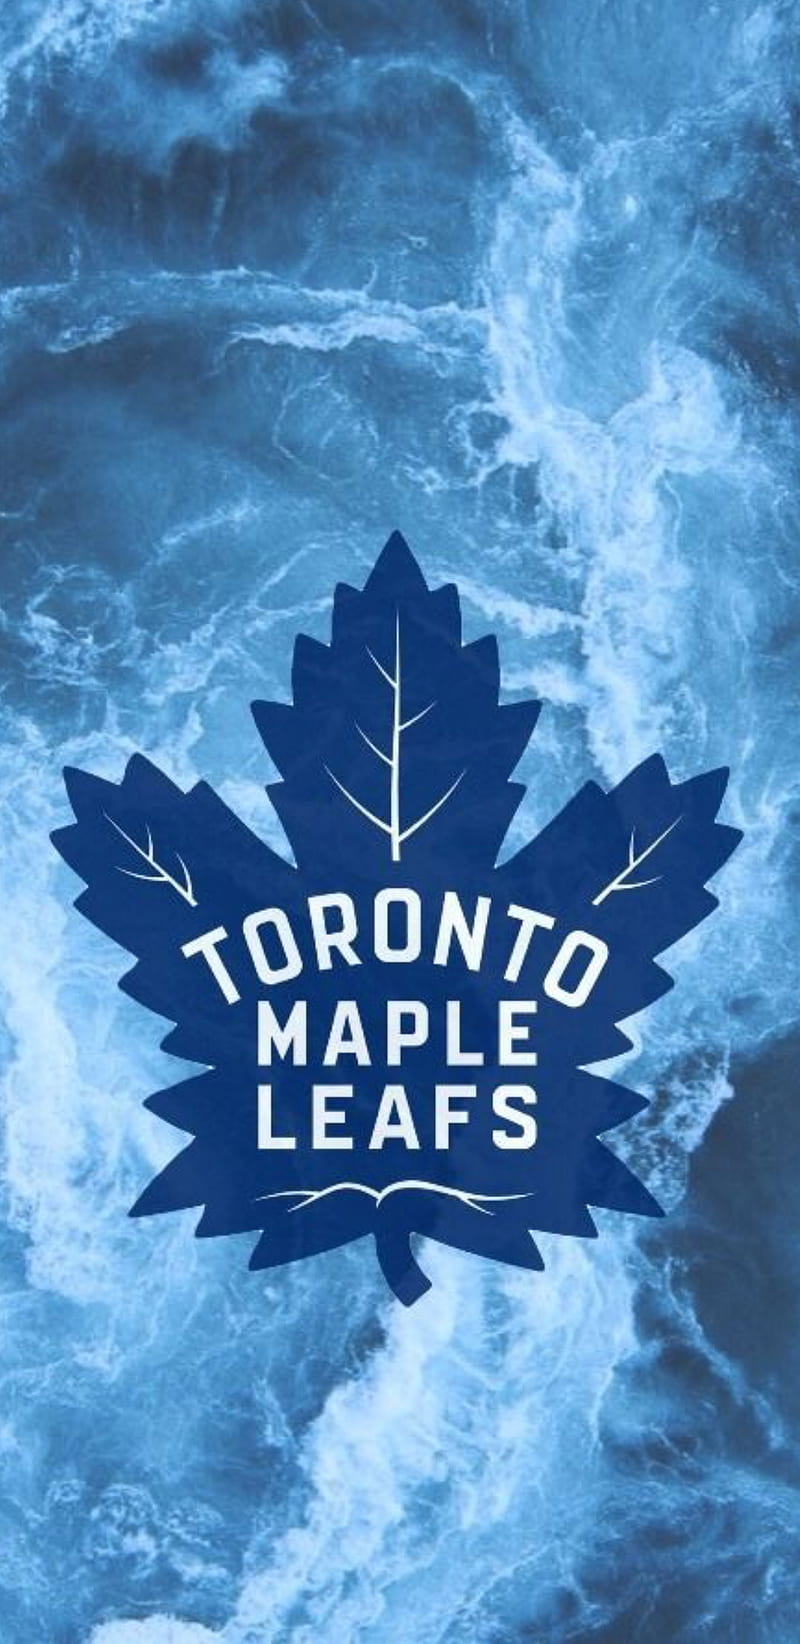 Toronto Maple Leafs Phone Wallpaper - Mobile Abyss